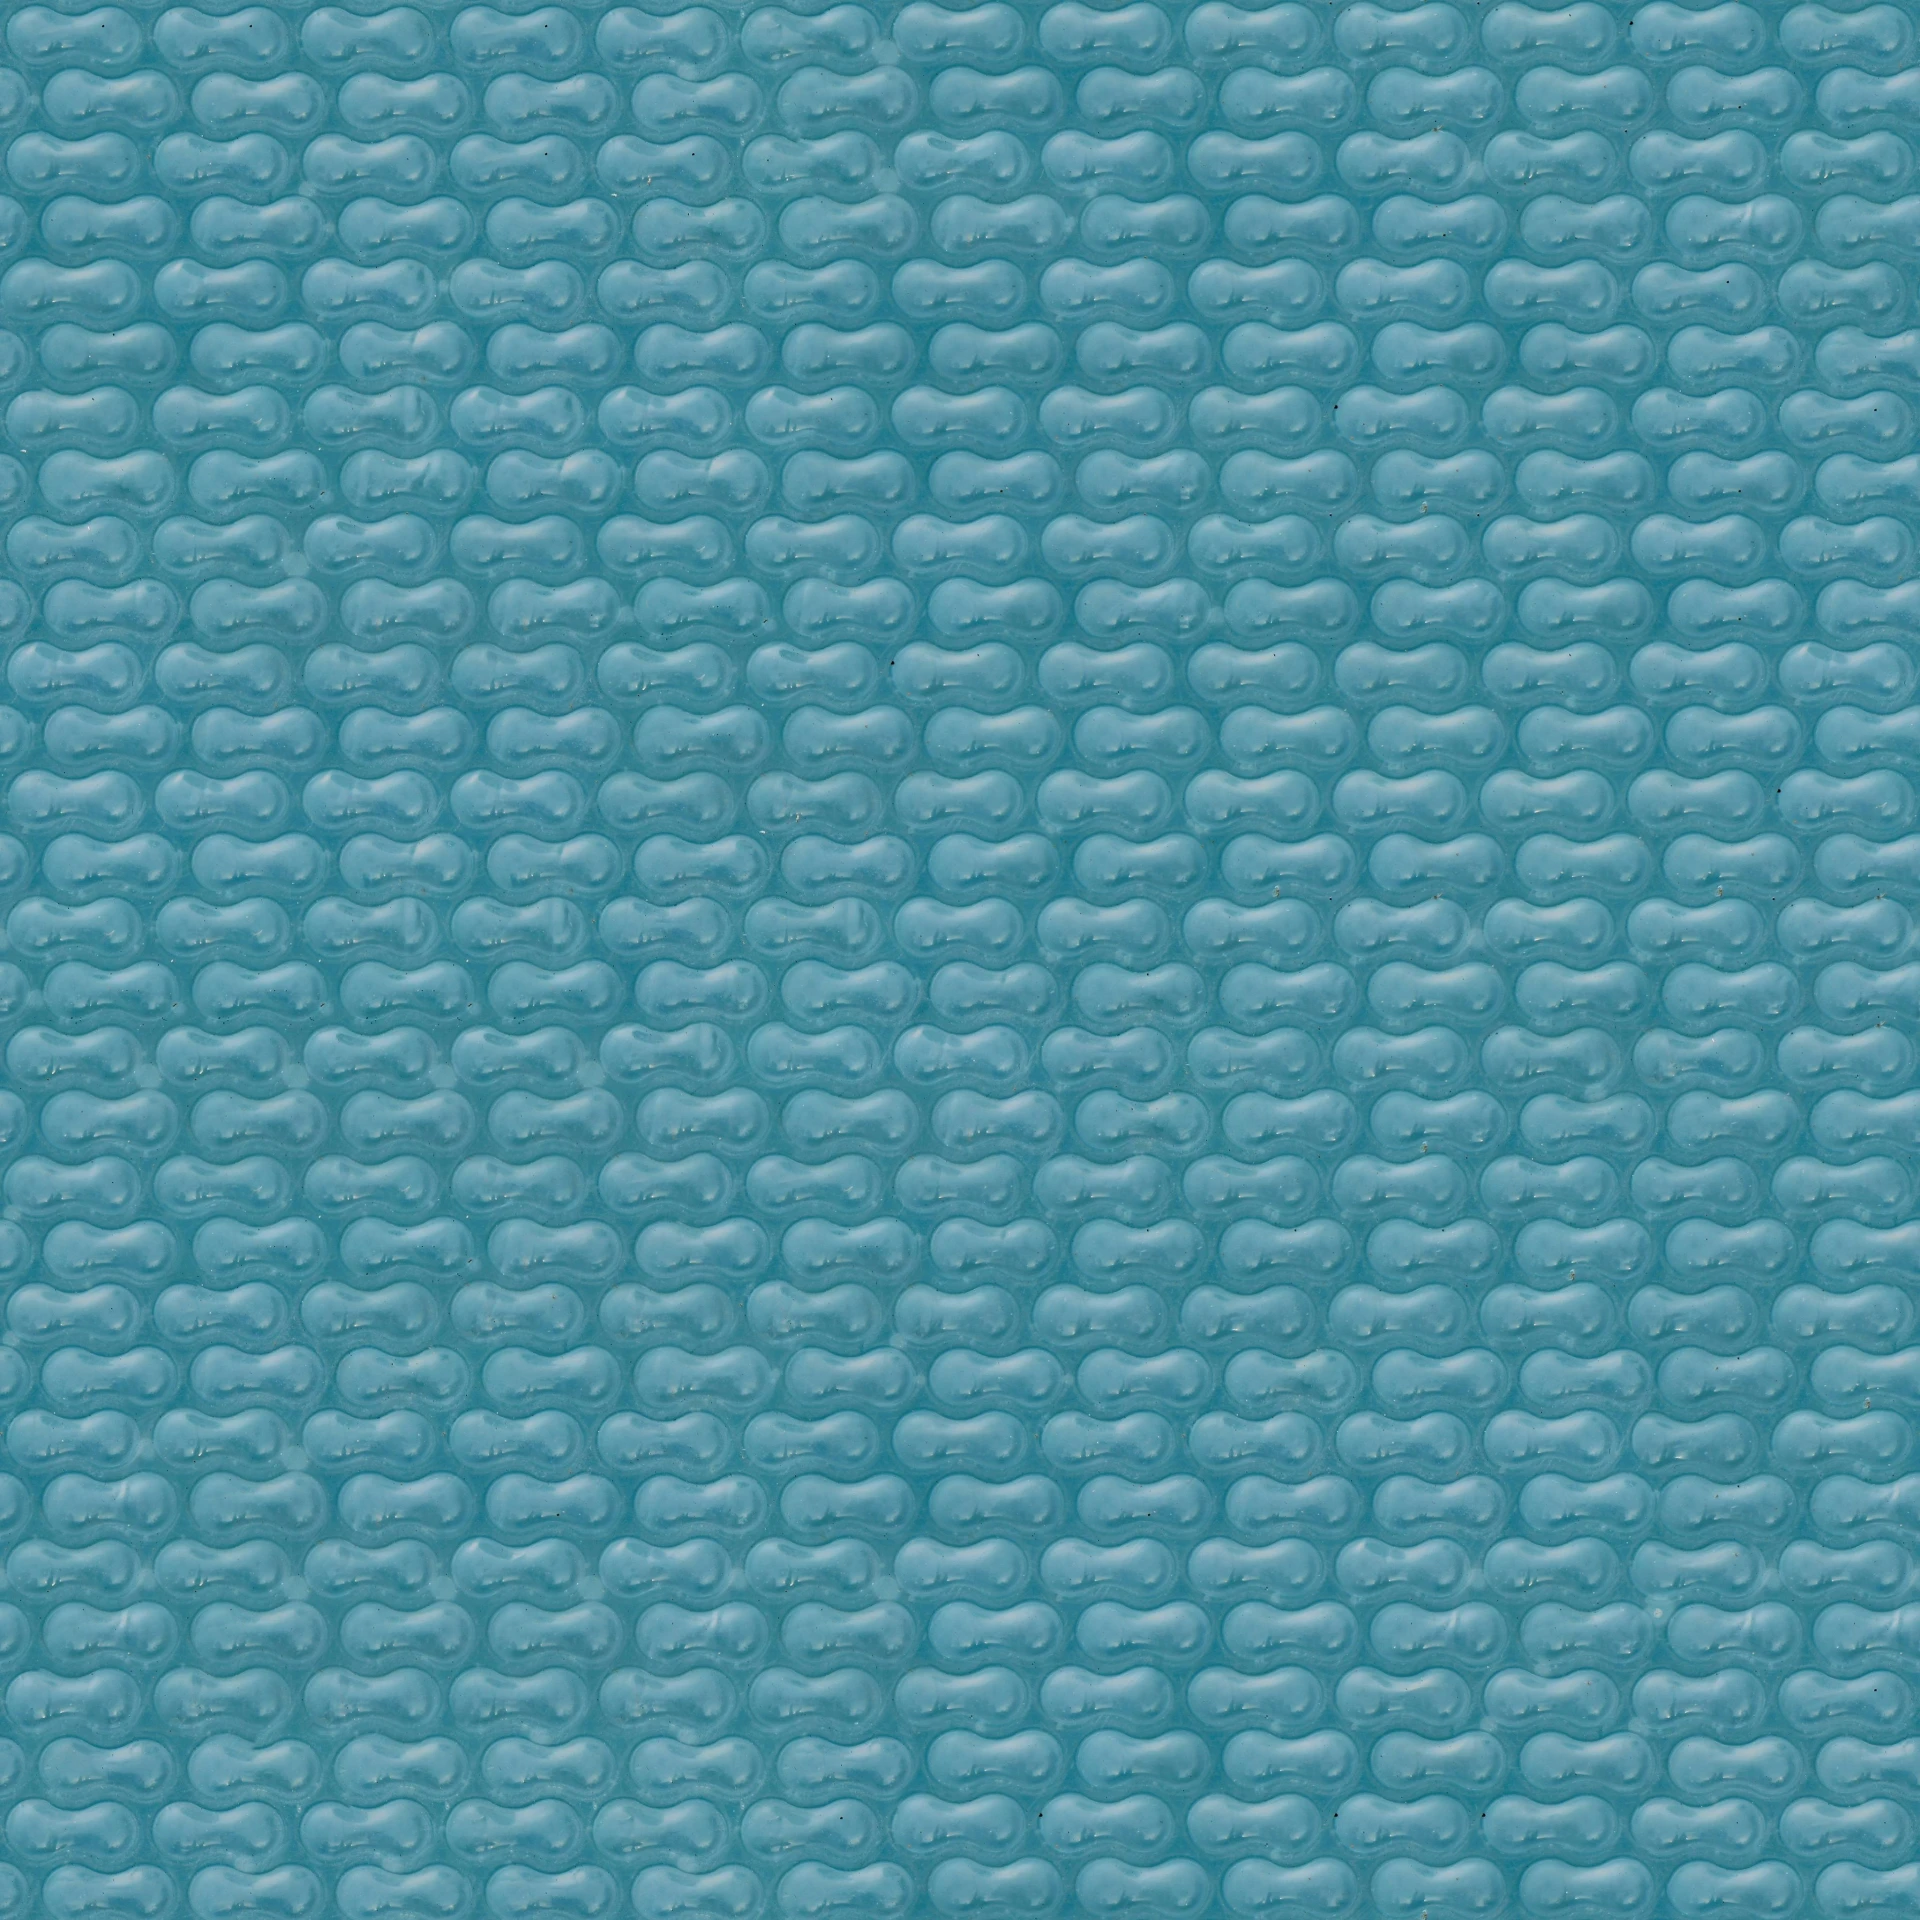 a close up of a blue fabric, computer art, tileable, illustration, baked bean skin texture, background artwork